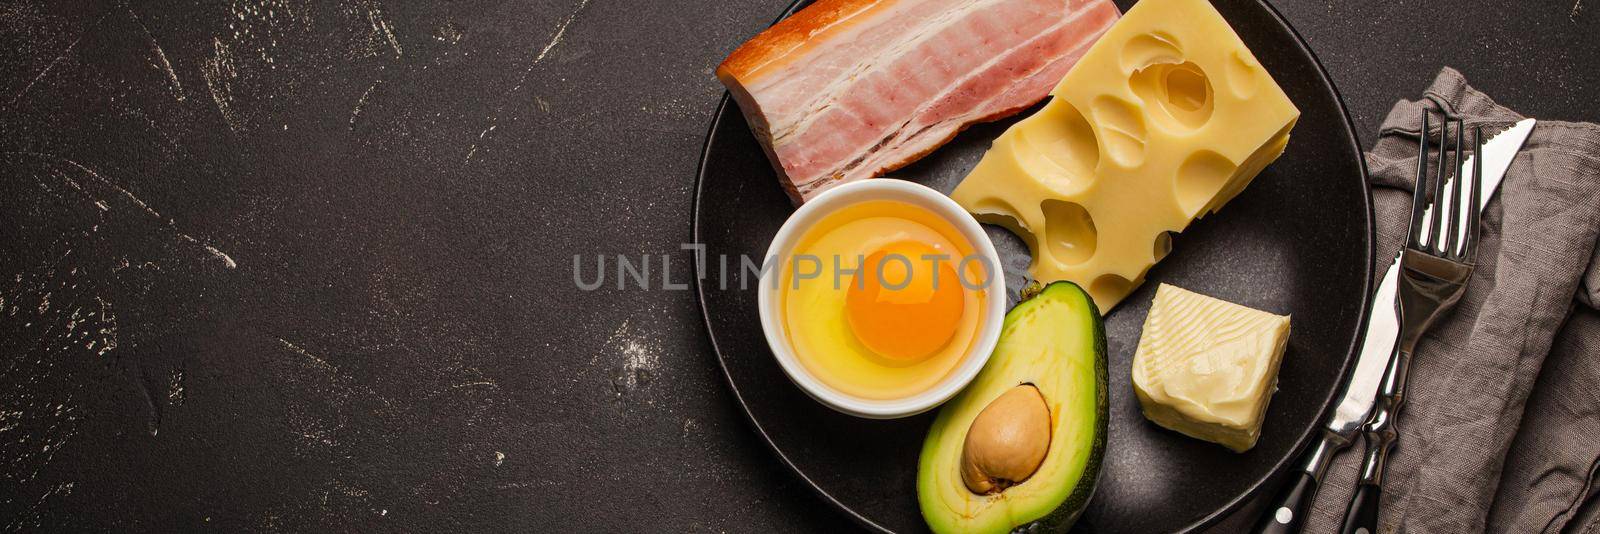 Main keto foods as butter, olive oil, fried egg, avocado, fat meat bacon, cheese for ketogenic diet on black plate on dark rustic stone background, products for weight loss top view copy space